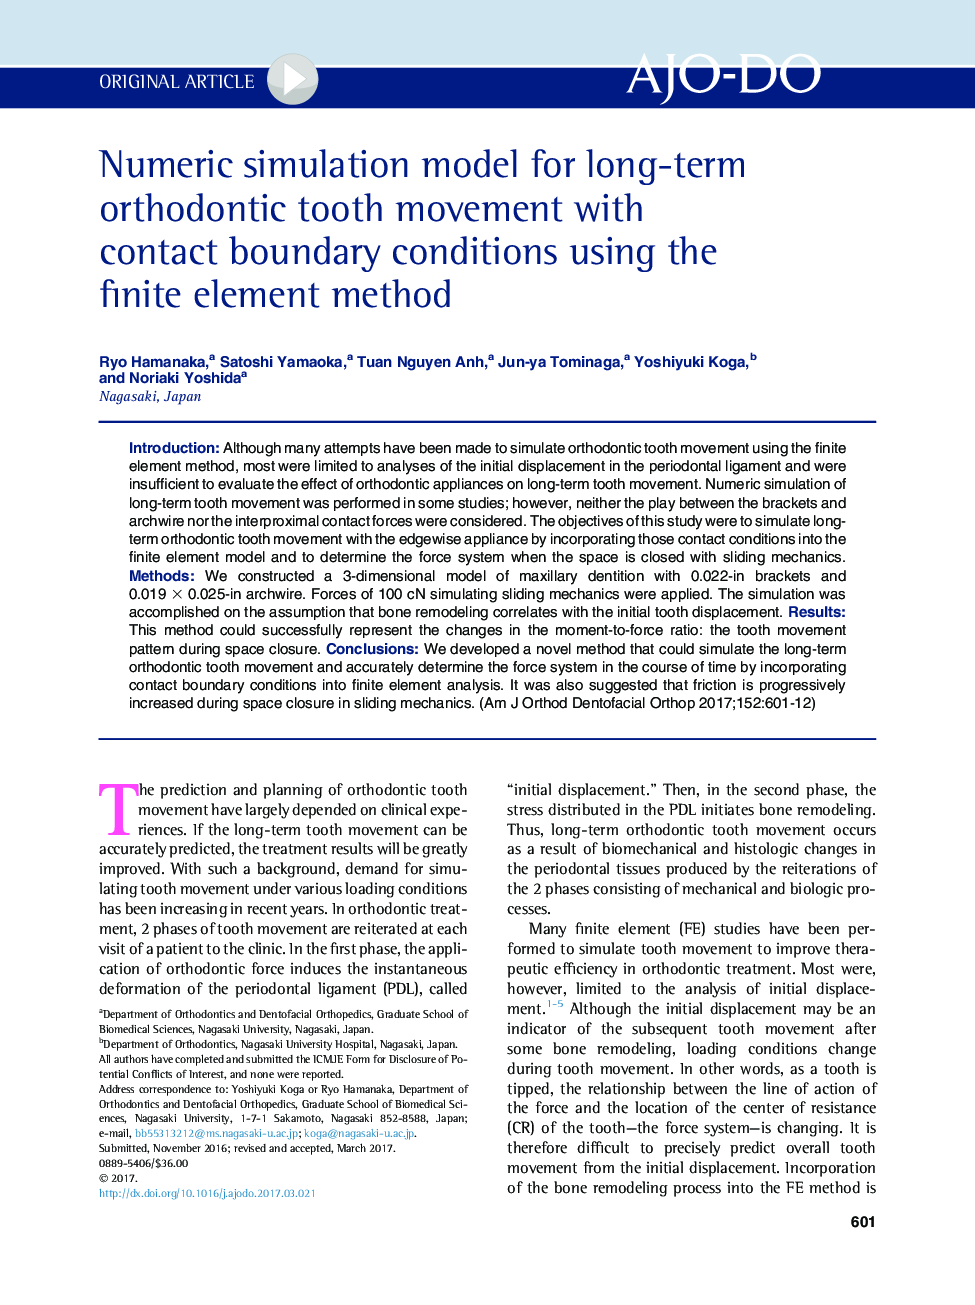 Numeric simulation model for long-term orthodontic tooth movement with contact boundary conditions using the finite element method